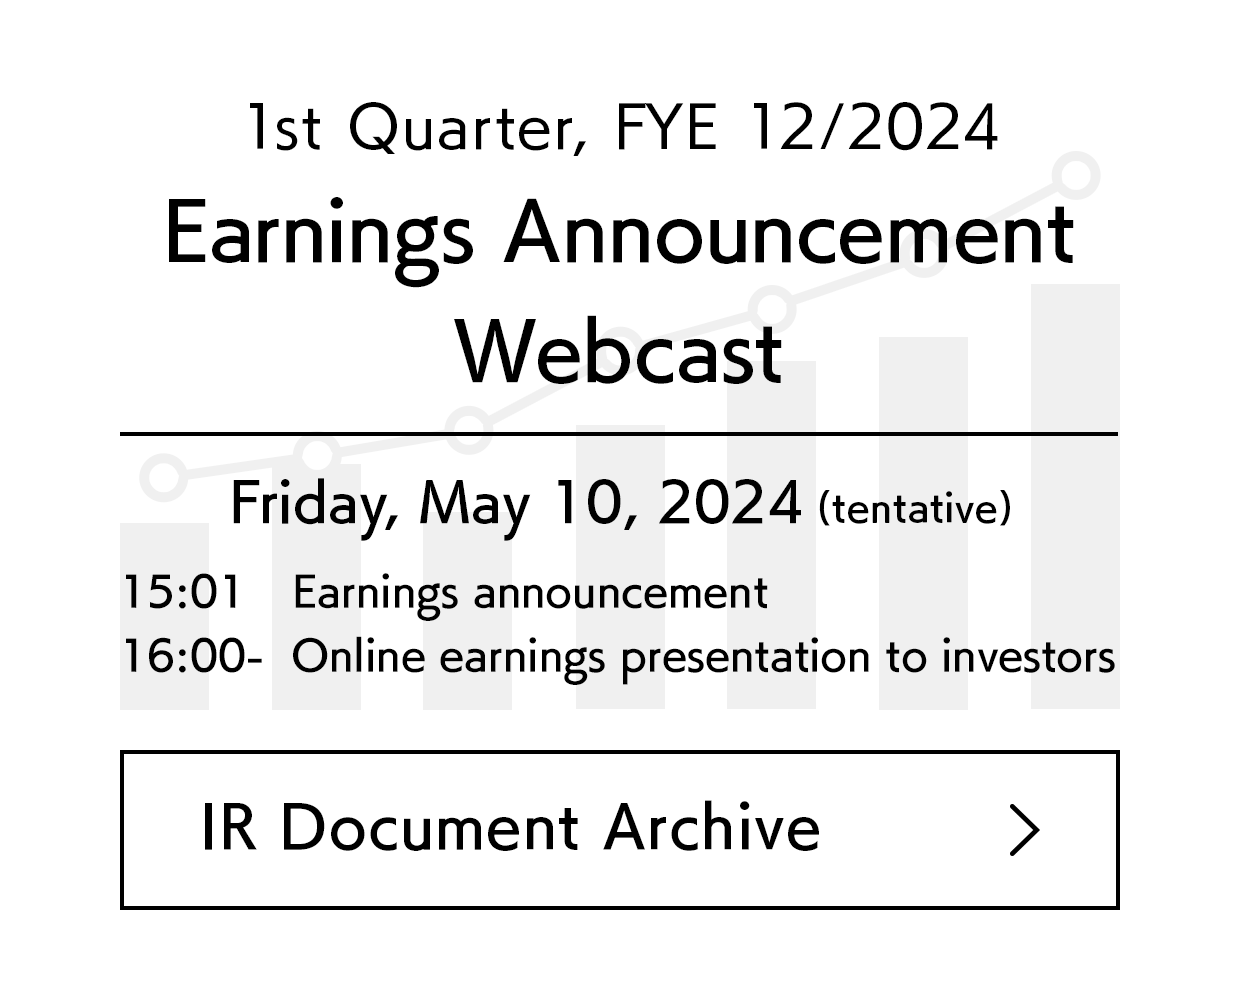 4th Quarter, Fiscal Year 2023 Earnings Announcement Webcast